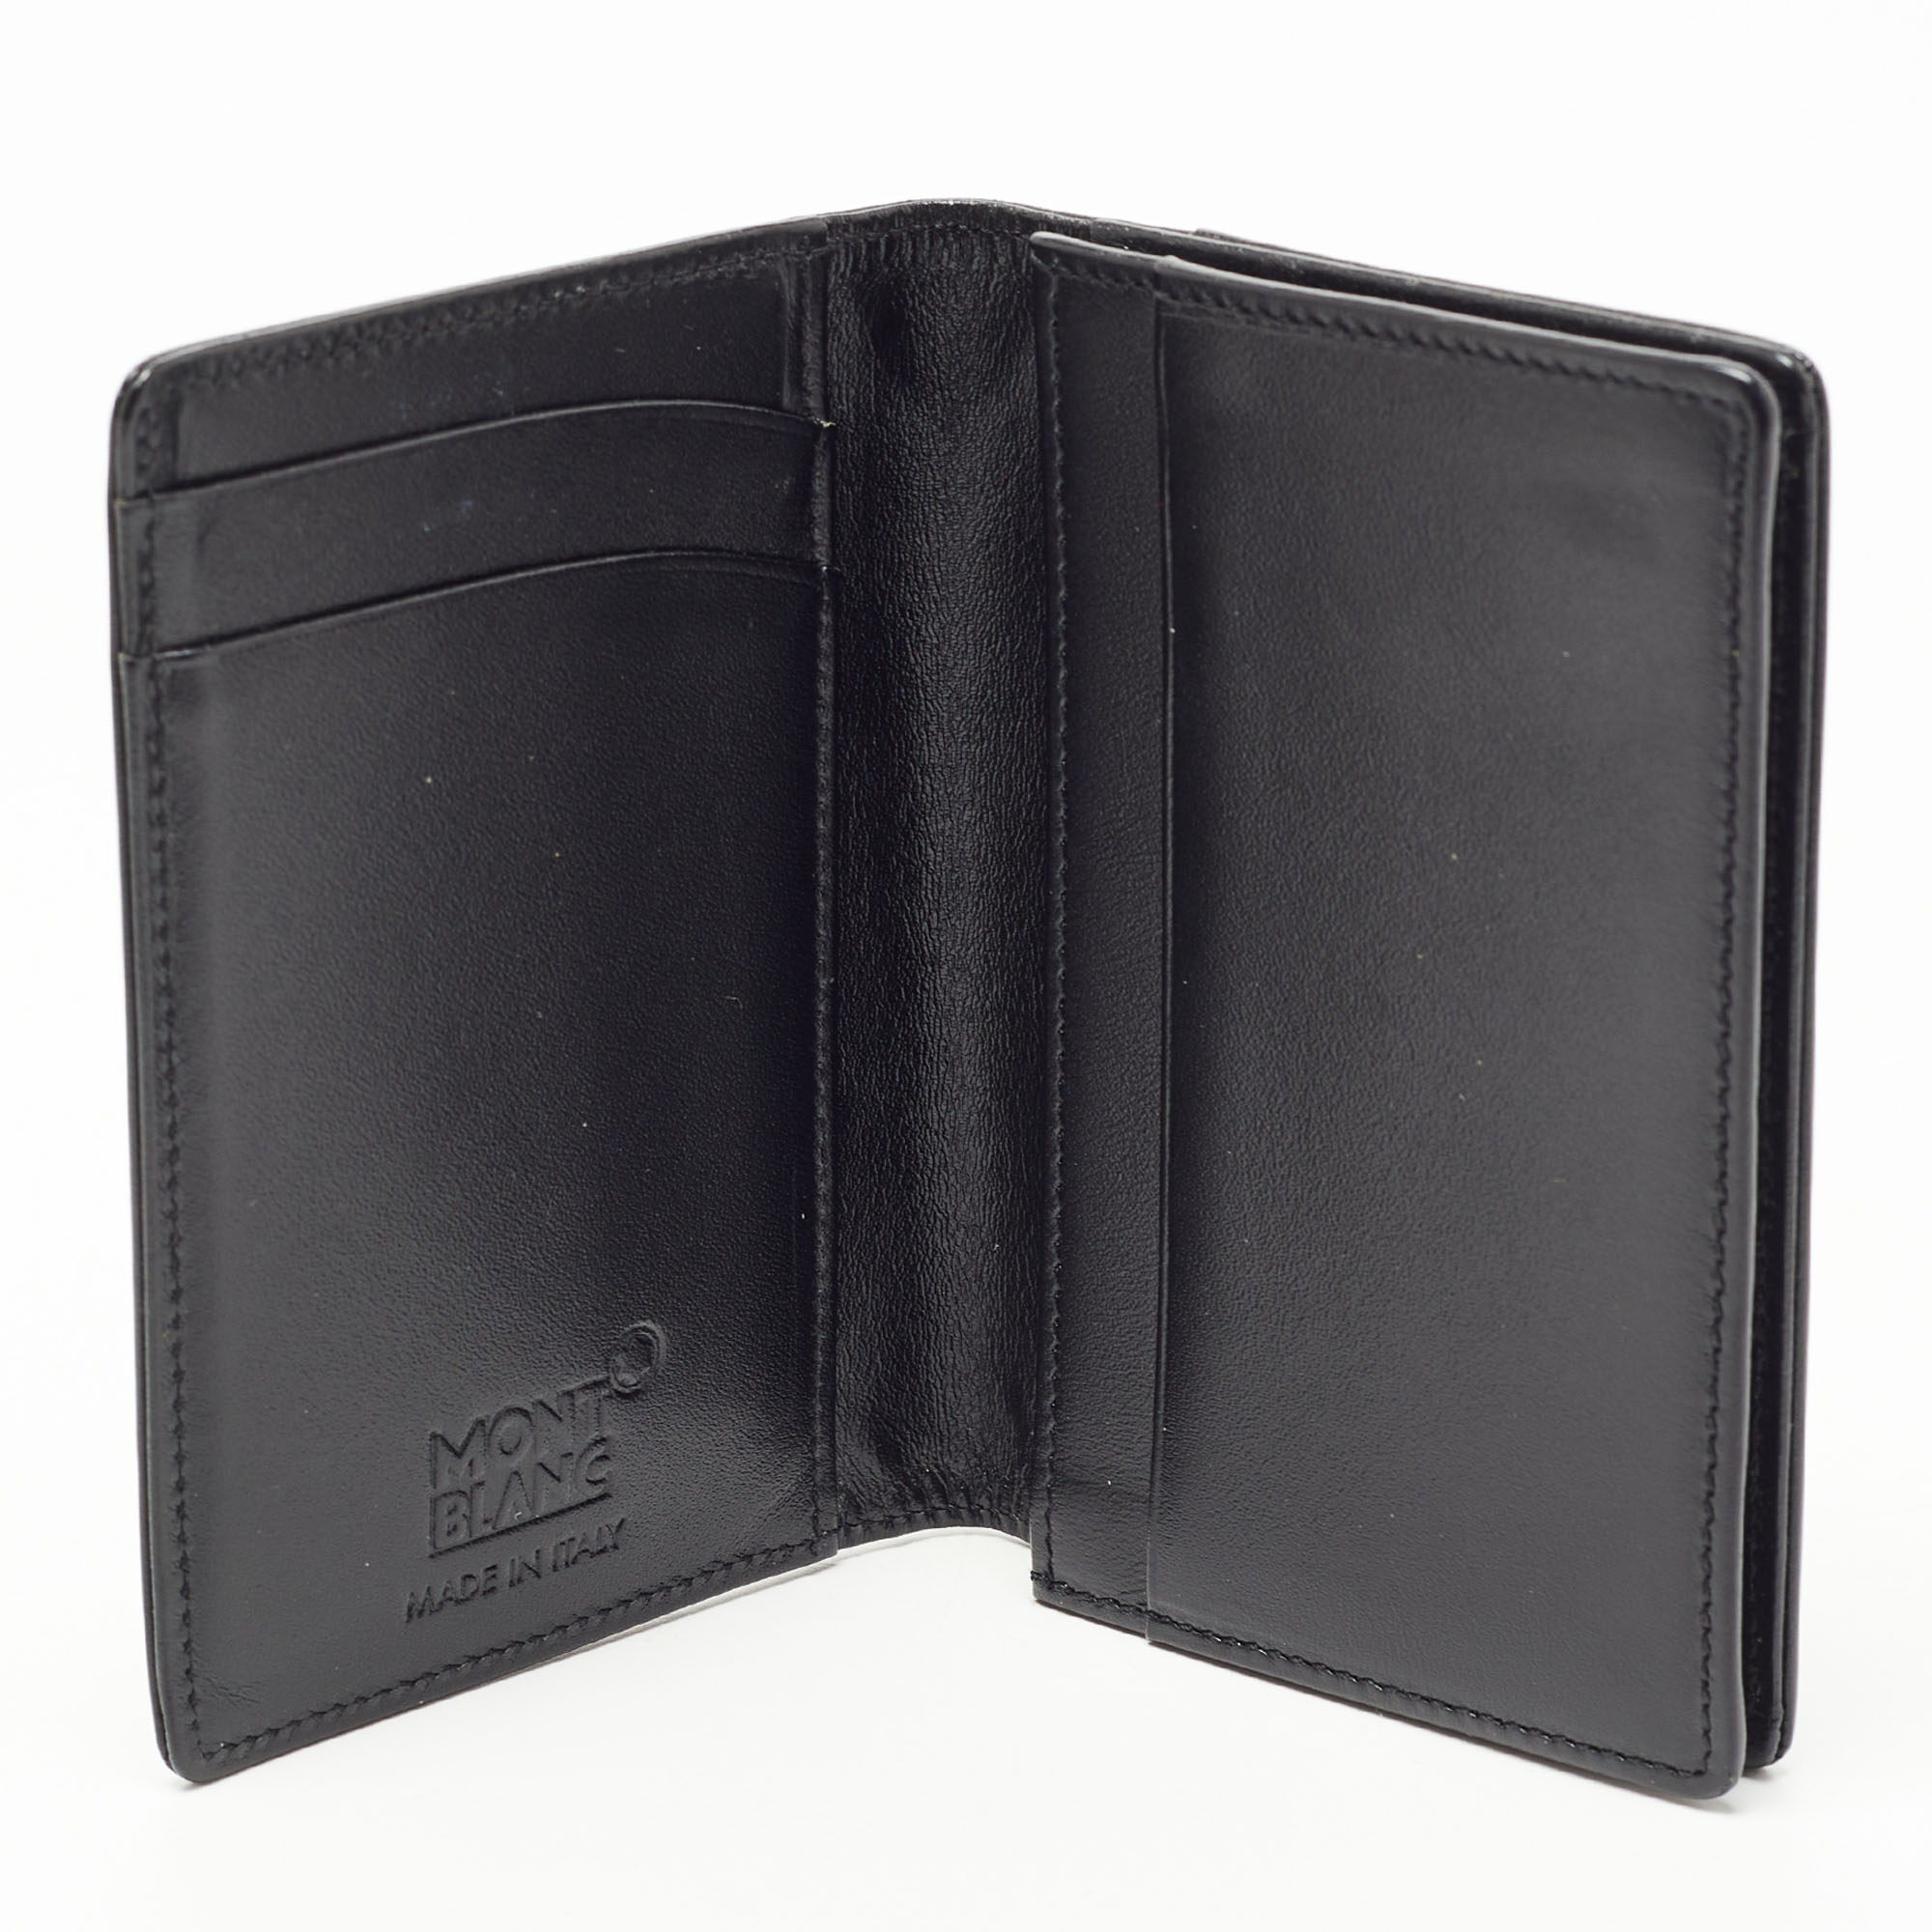 

Montblanc Black Leather Meisterstück Business Card Holder with Gusset